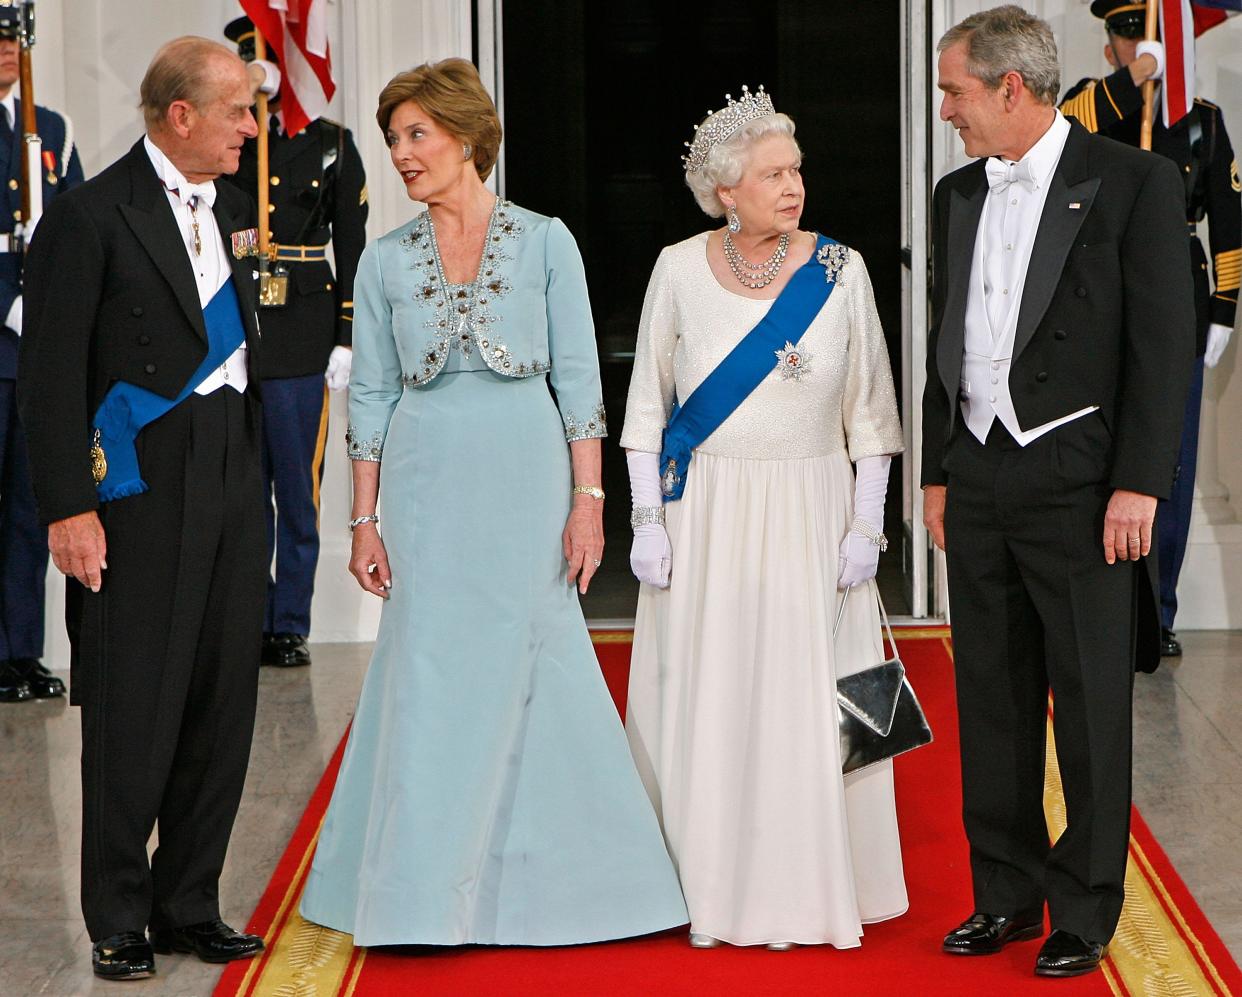 President George W. Bush and first lady Laura Bush stand with Queen Elizabeth and Prince Philip at a 2007 state dinner.